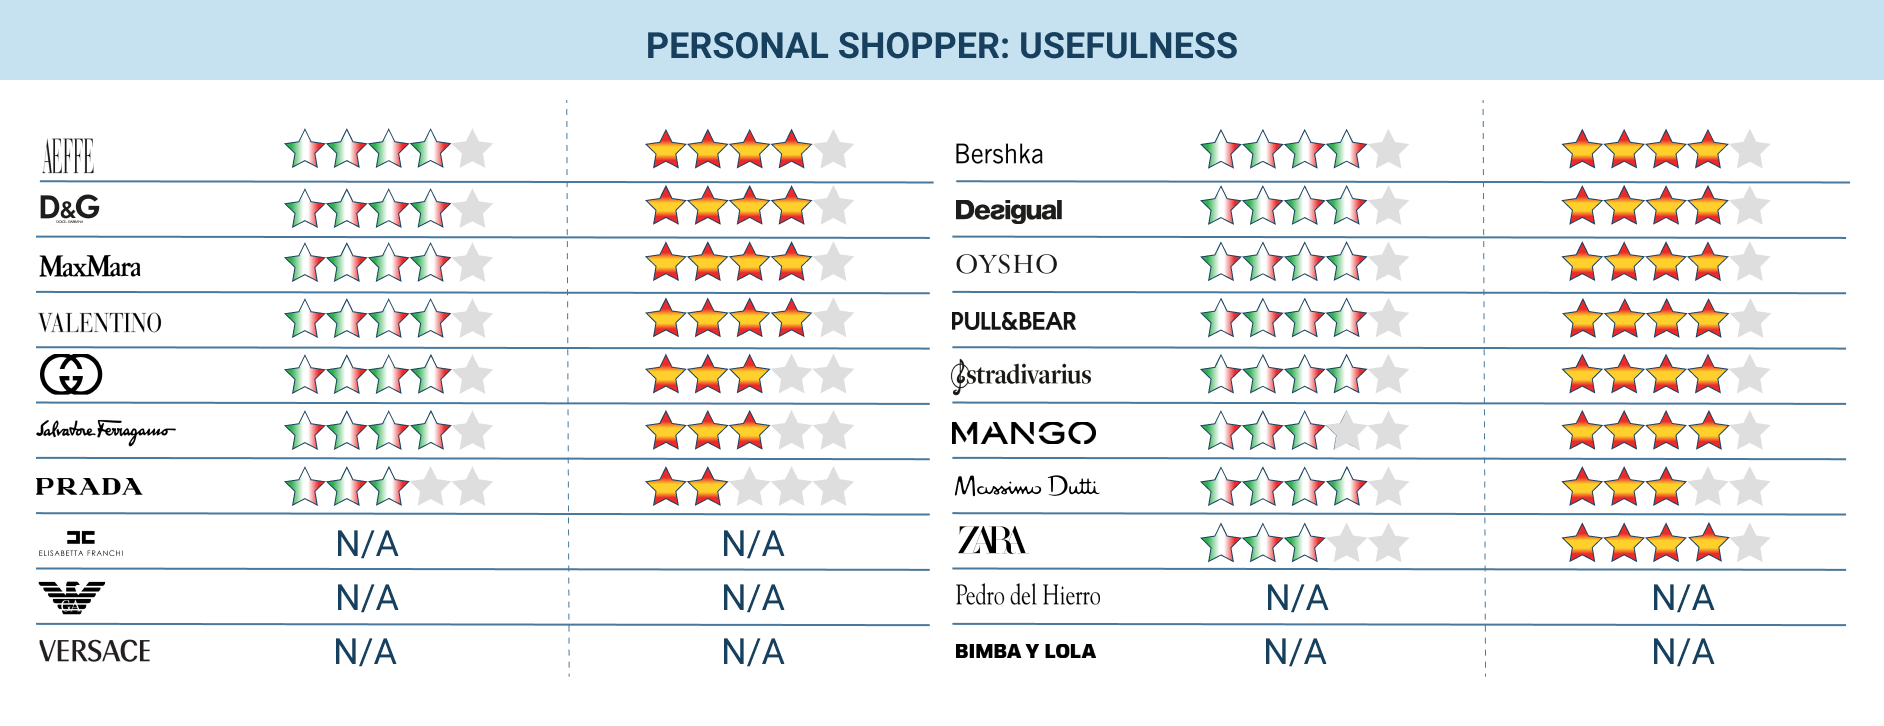 results of usefulness of the personal shopper